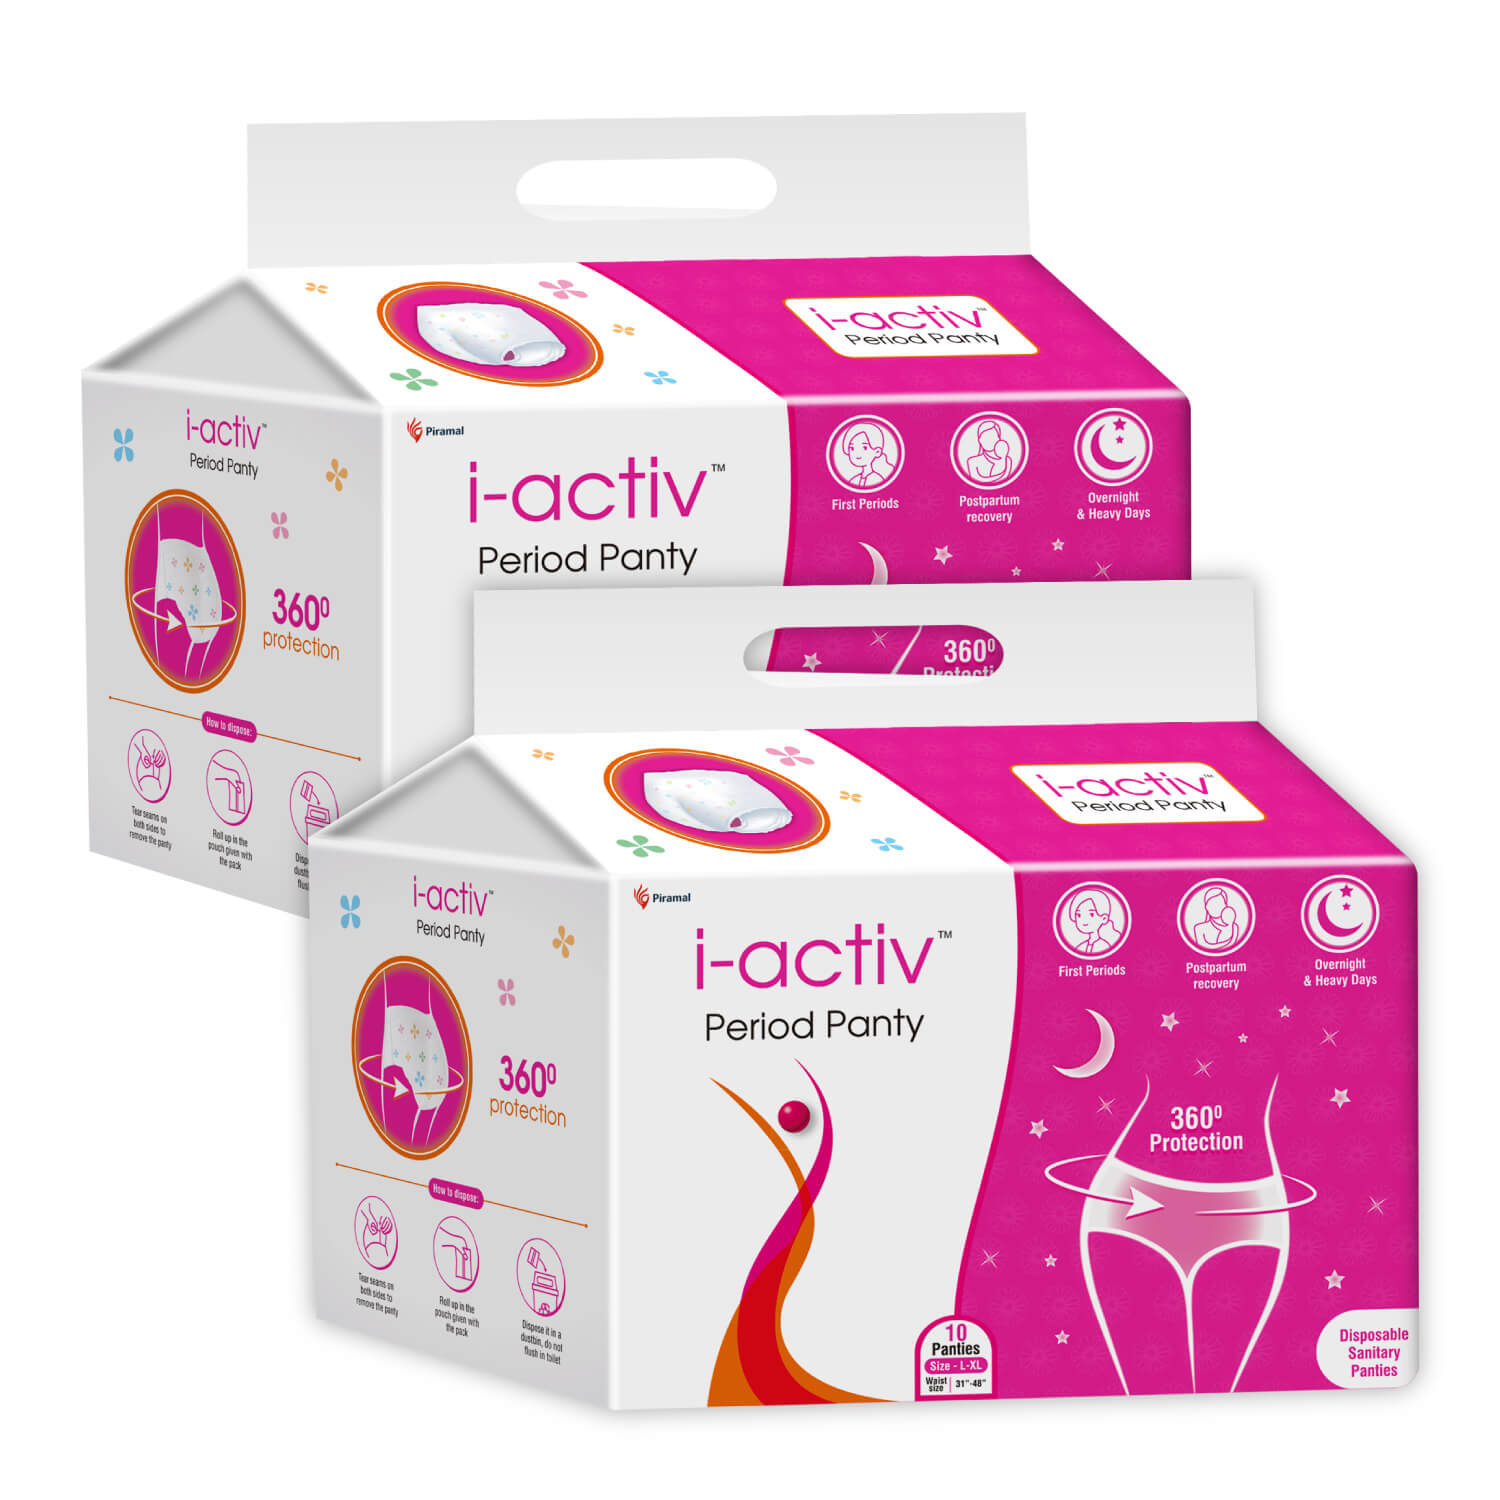 Disposable Period Panties with Built-in Pad (12 Pack) Menstrual Underwear  (3 Boxes of 4 pc) (L/XL)